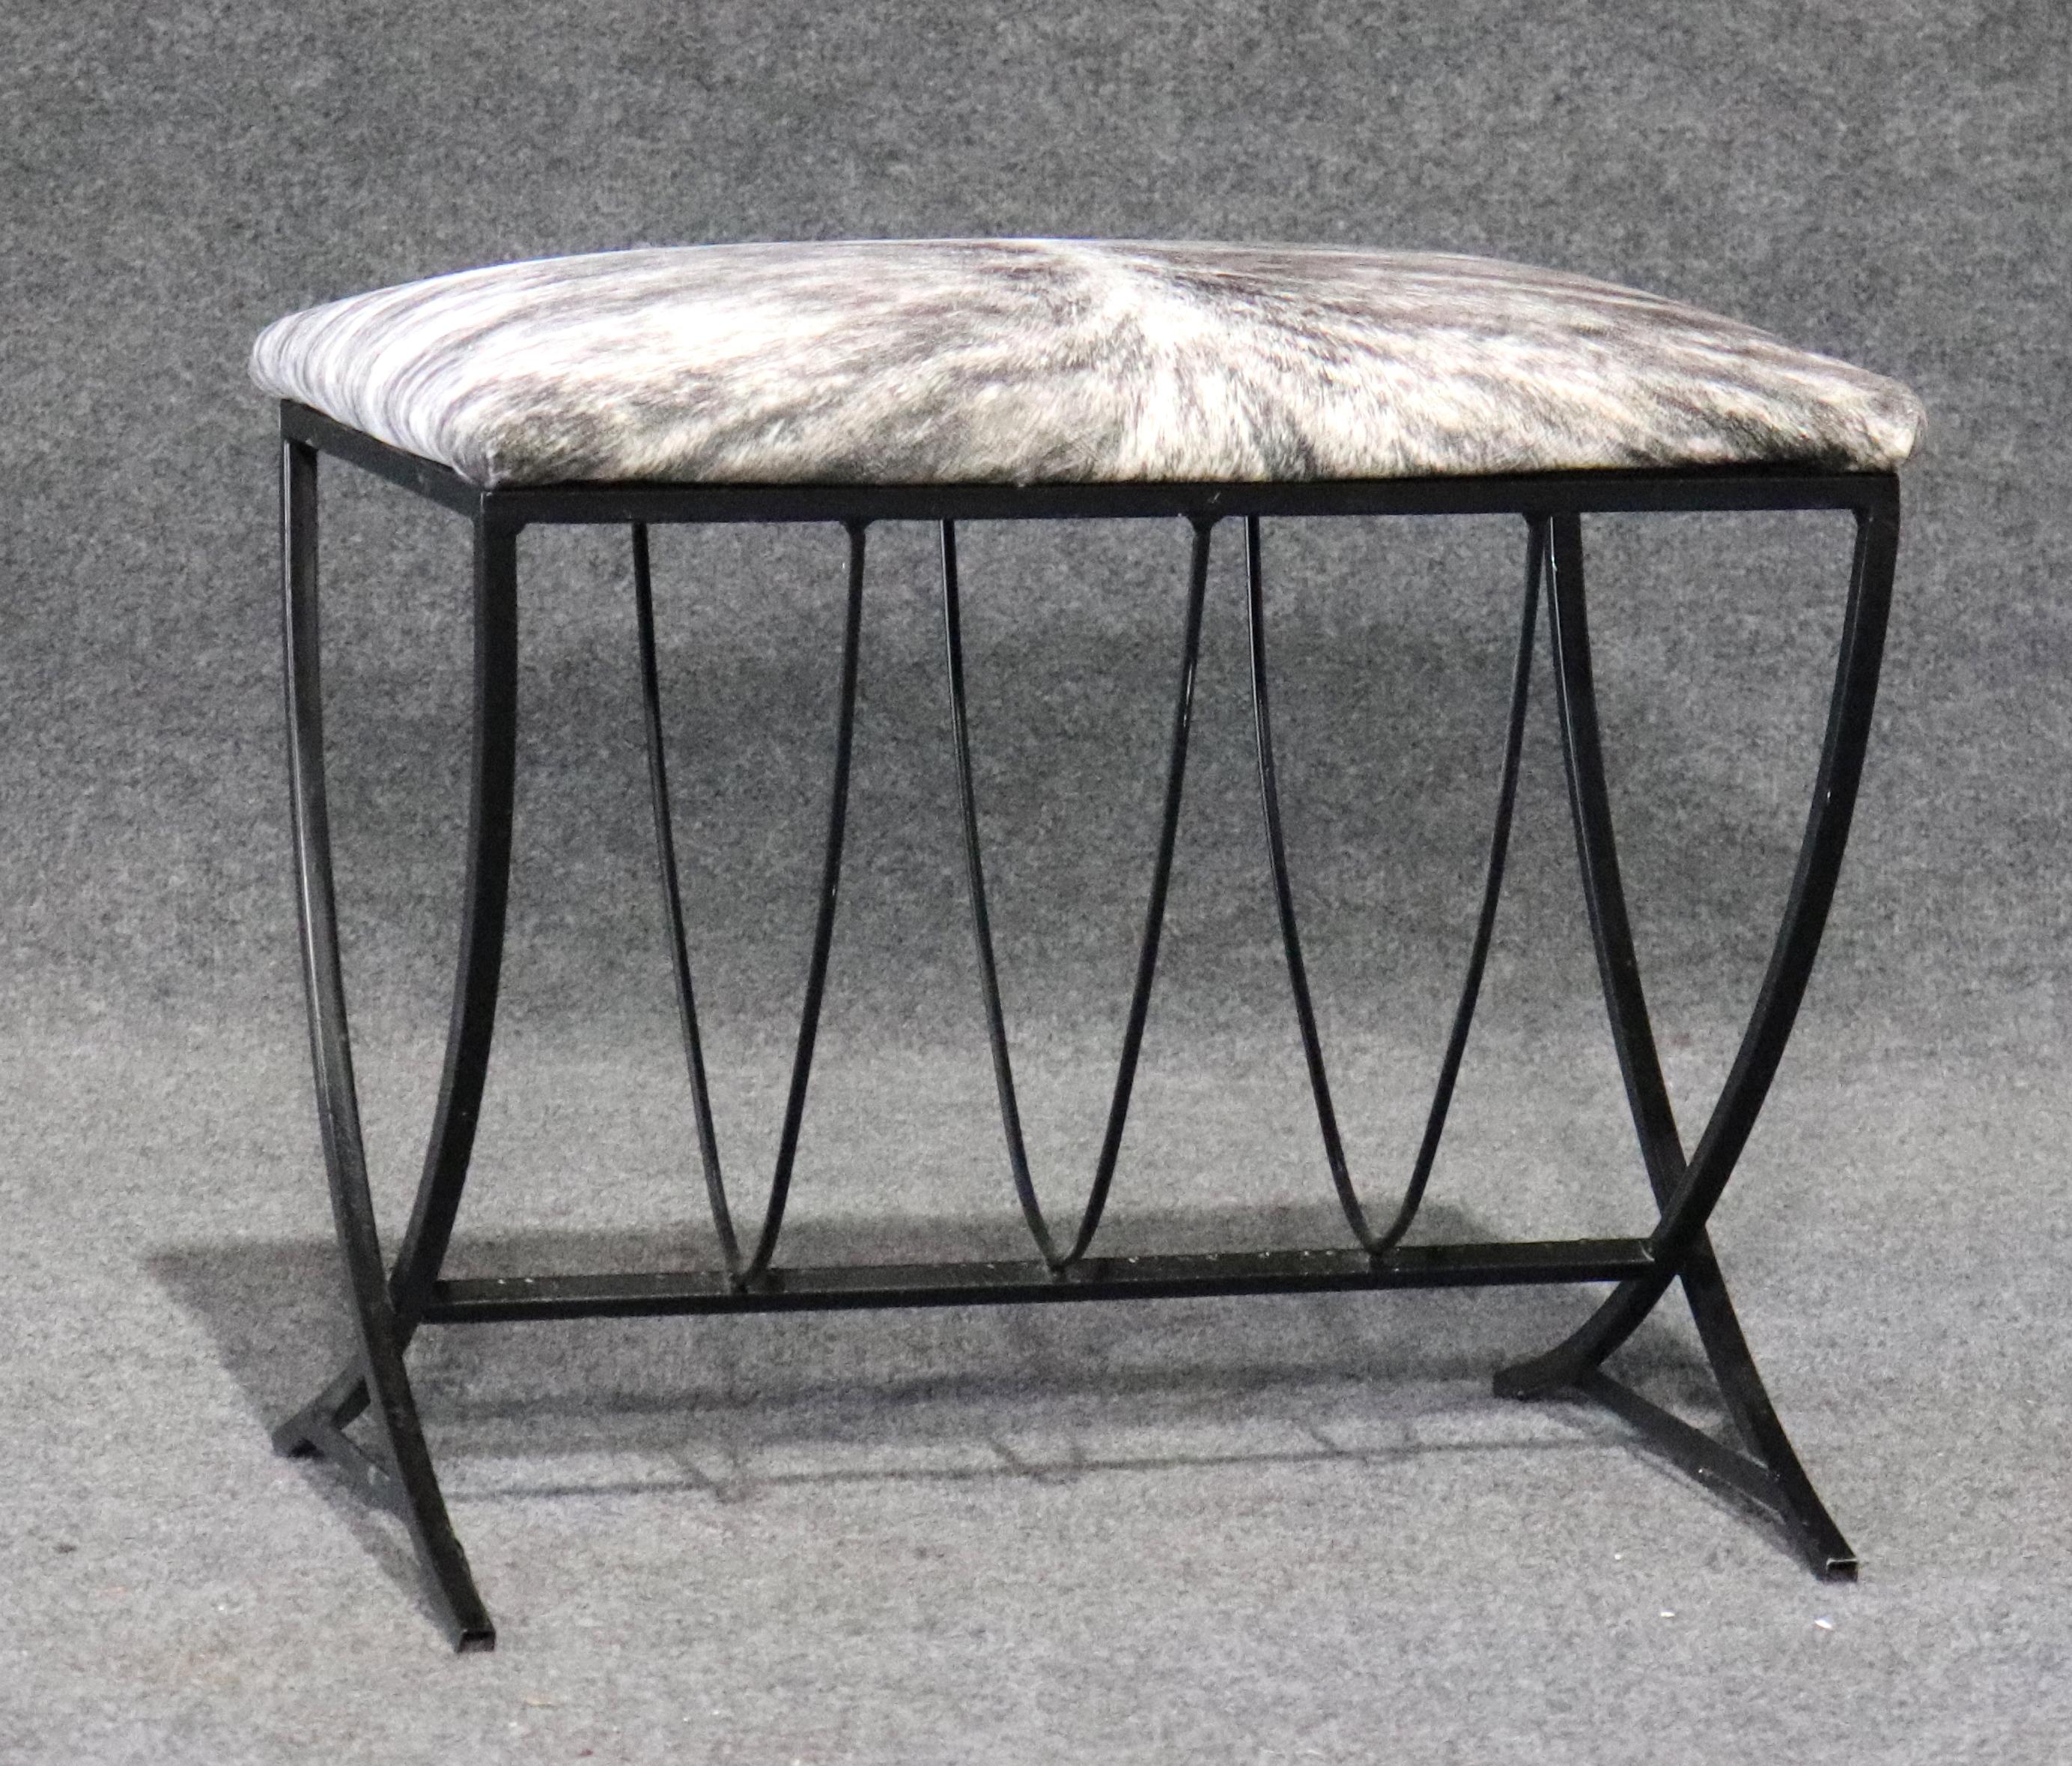 Wrought iron metal base in black with attractive criss cross lines. Faux zebra hide cushioned seat.
Please confirm location.